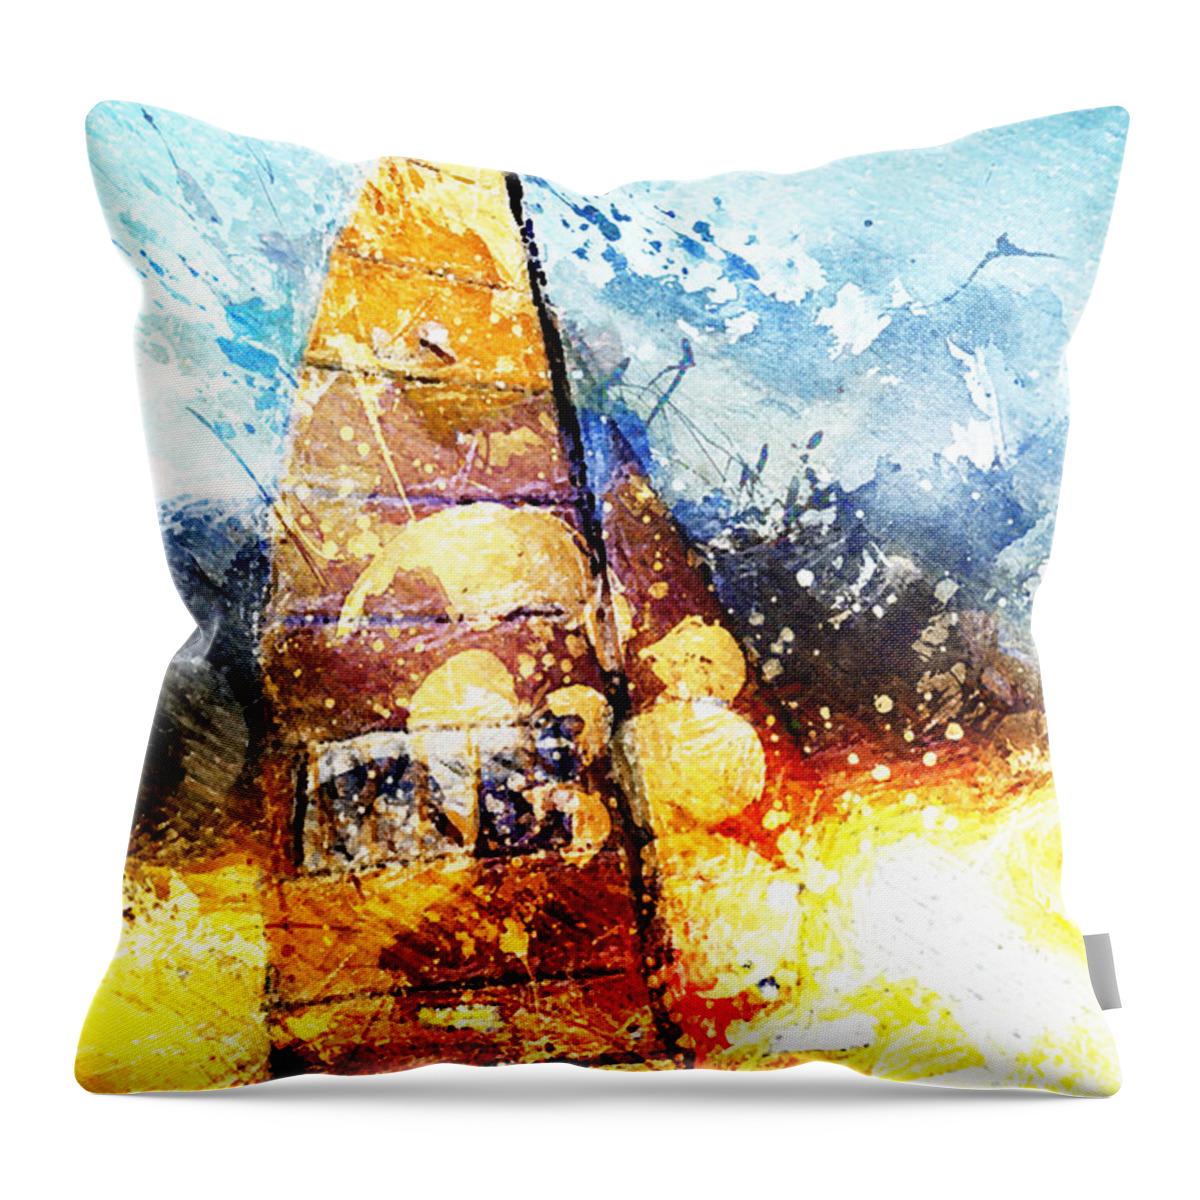 Sail Throw Pillow featuring the digital art Abstract Sailing by Andrea Barbieri